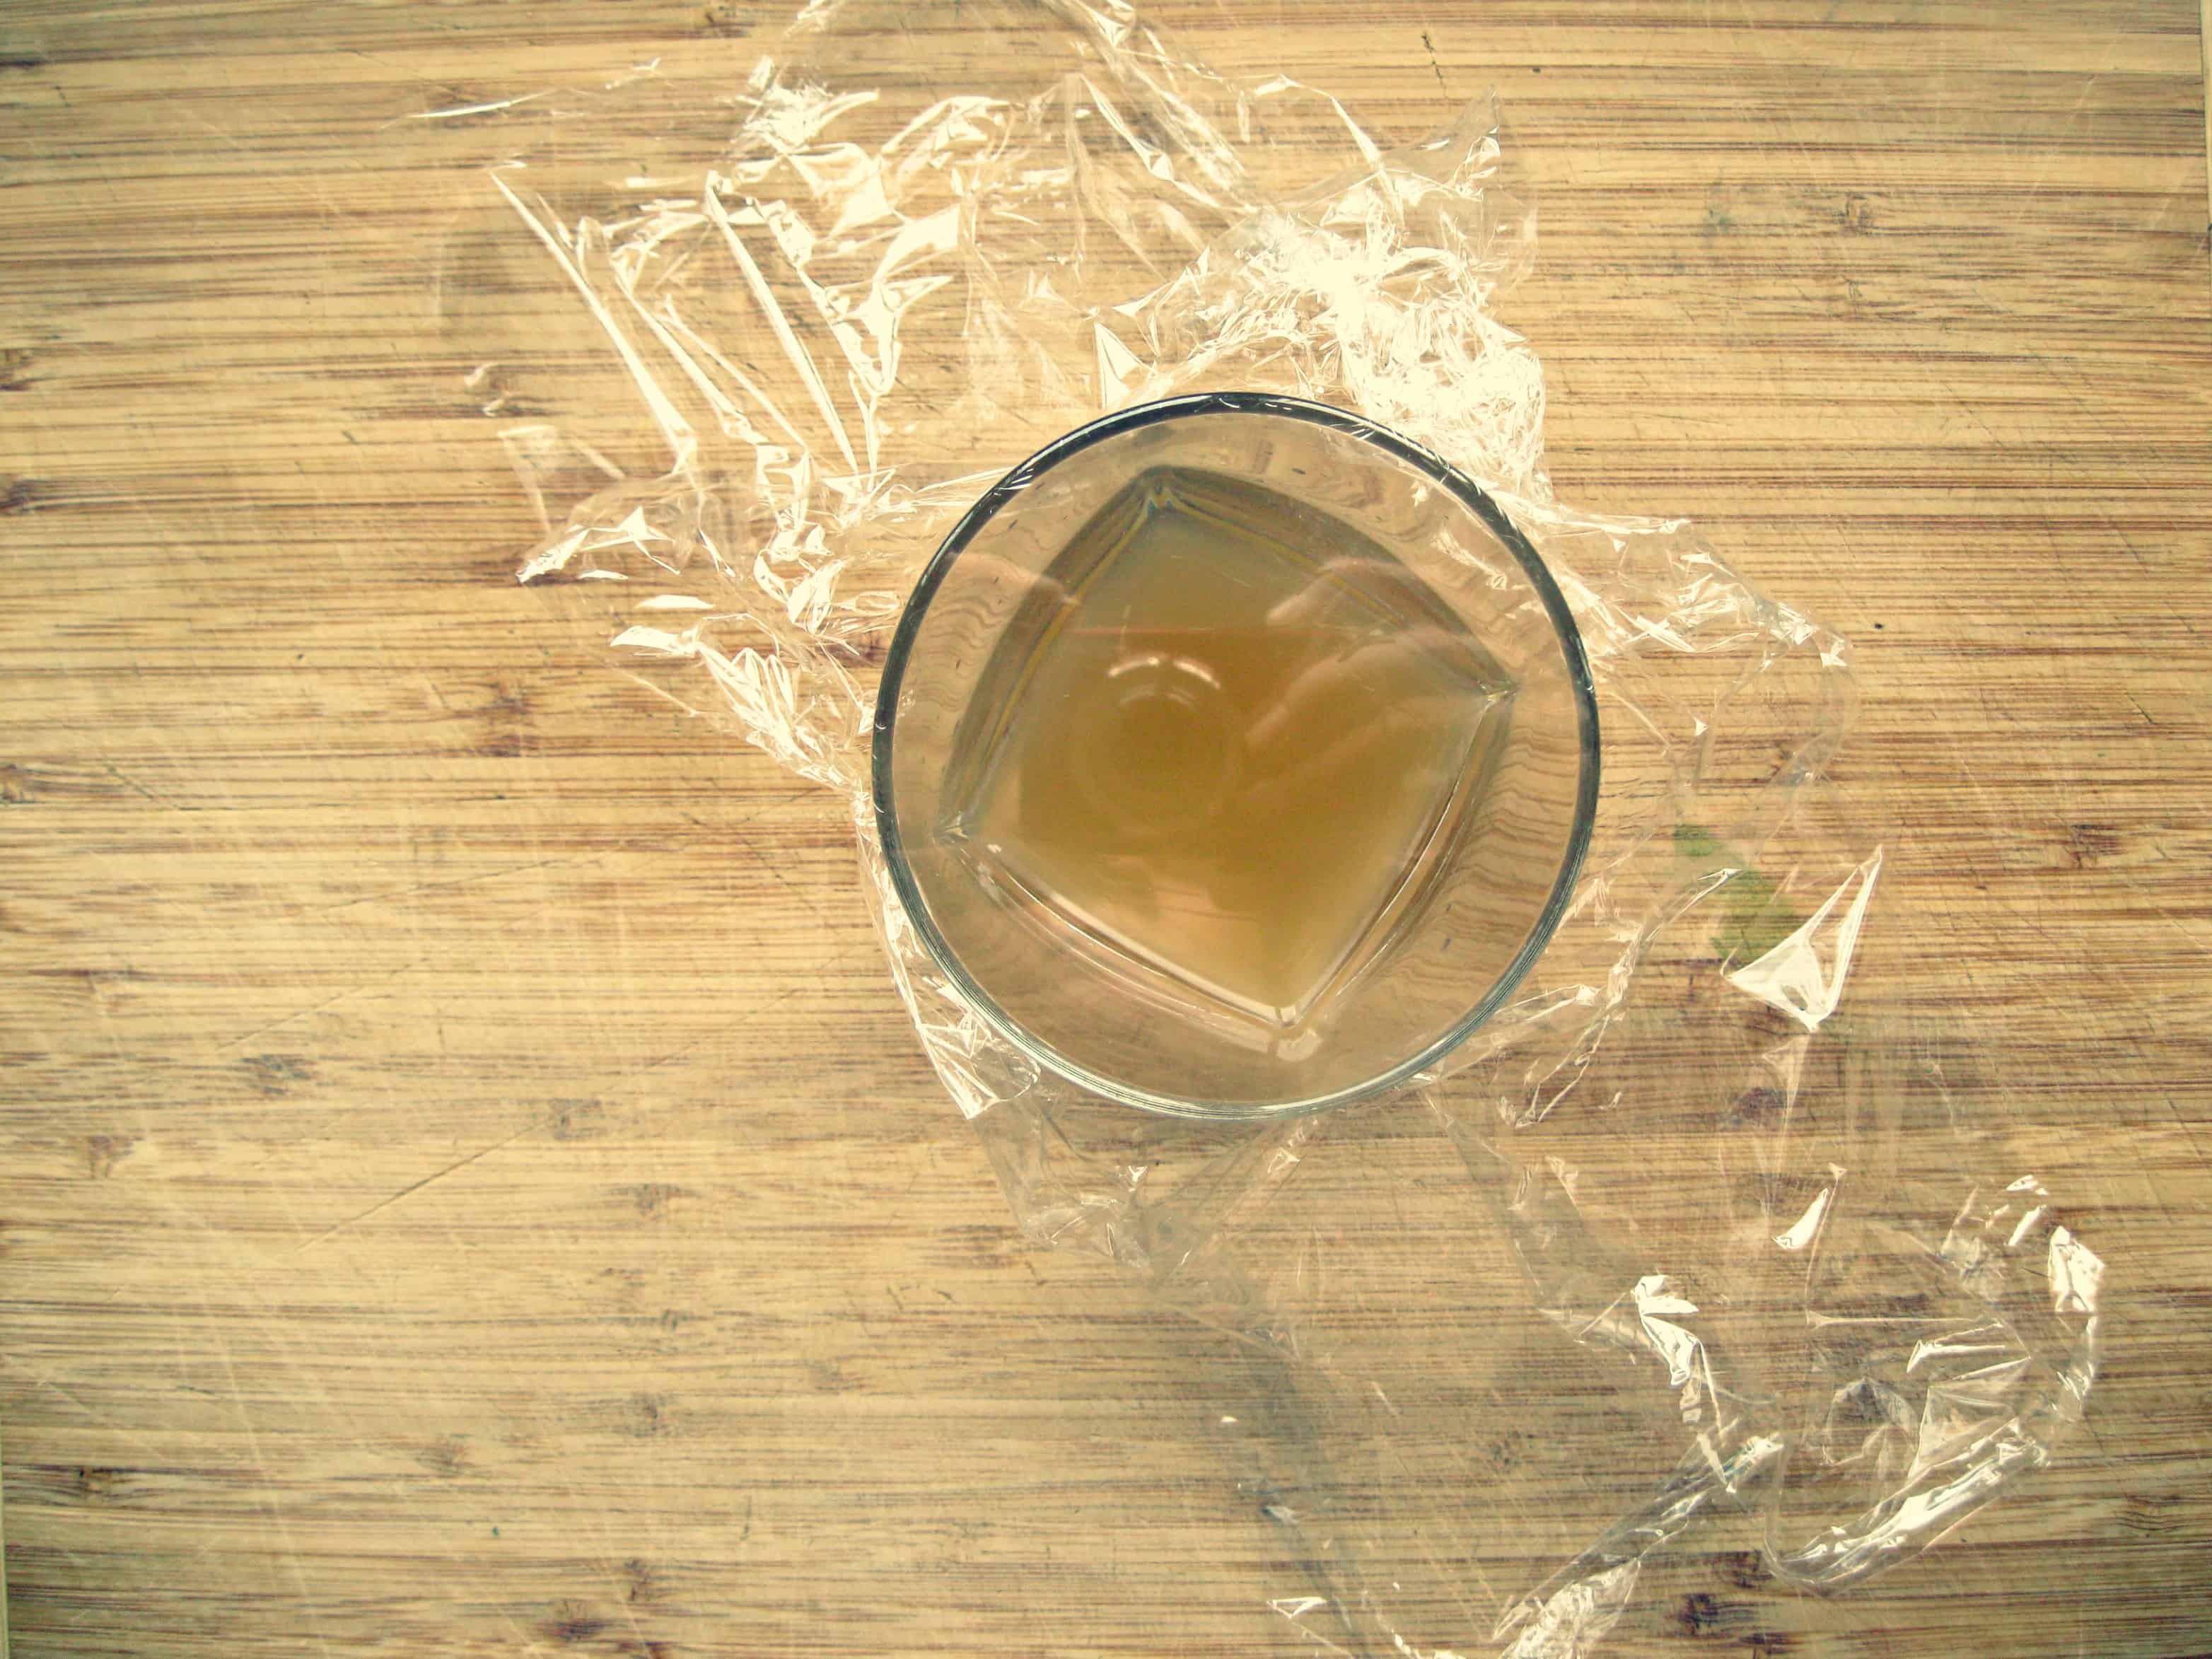 Plastic wrap overtop of a glass with apple cider vinegar.